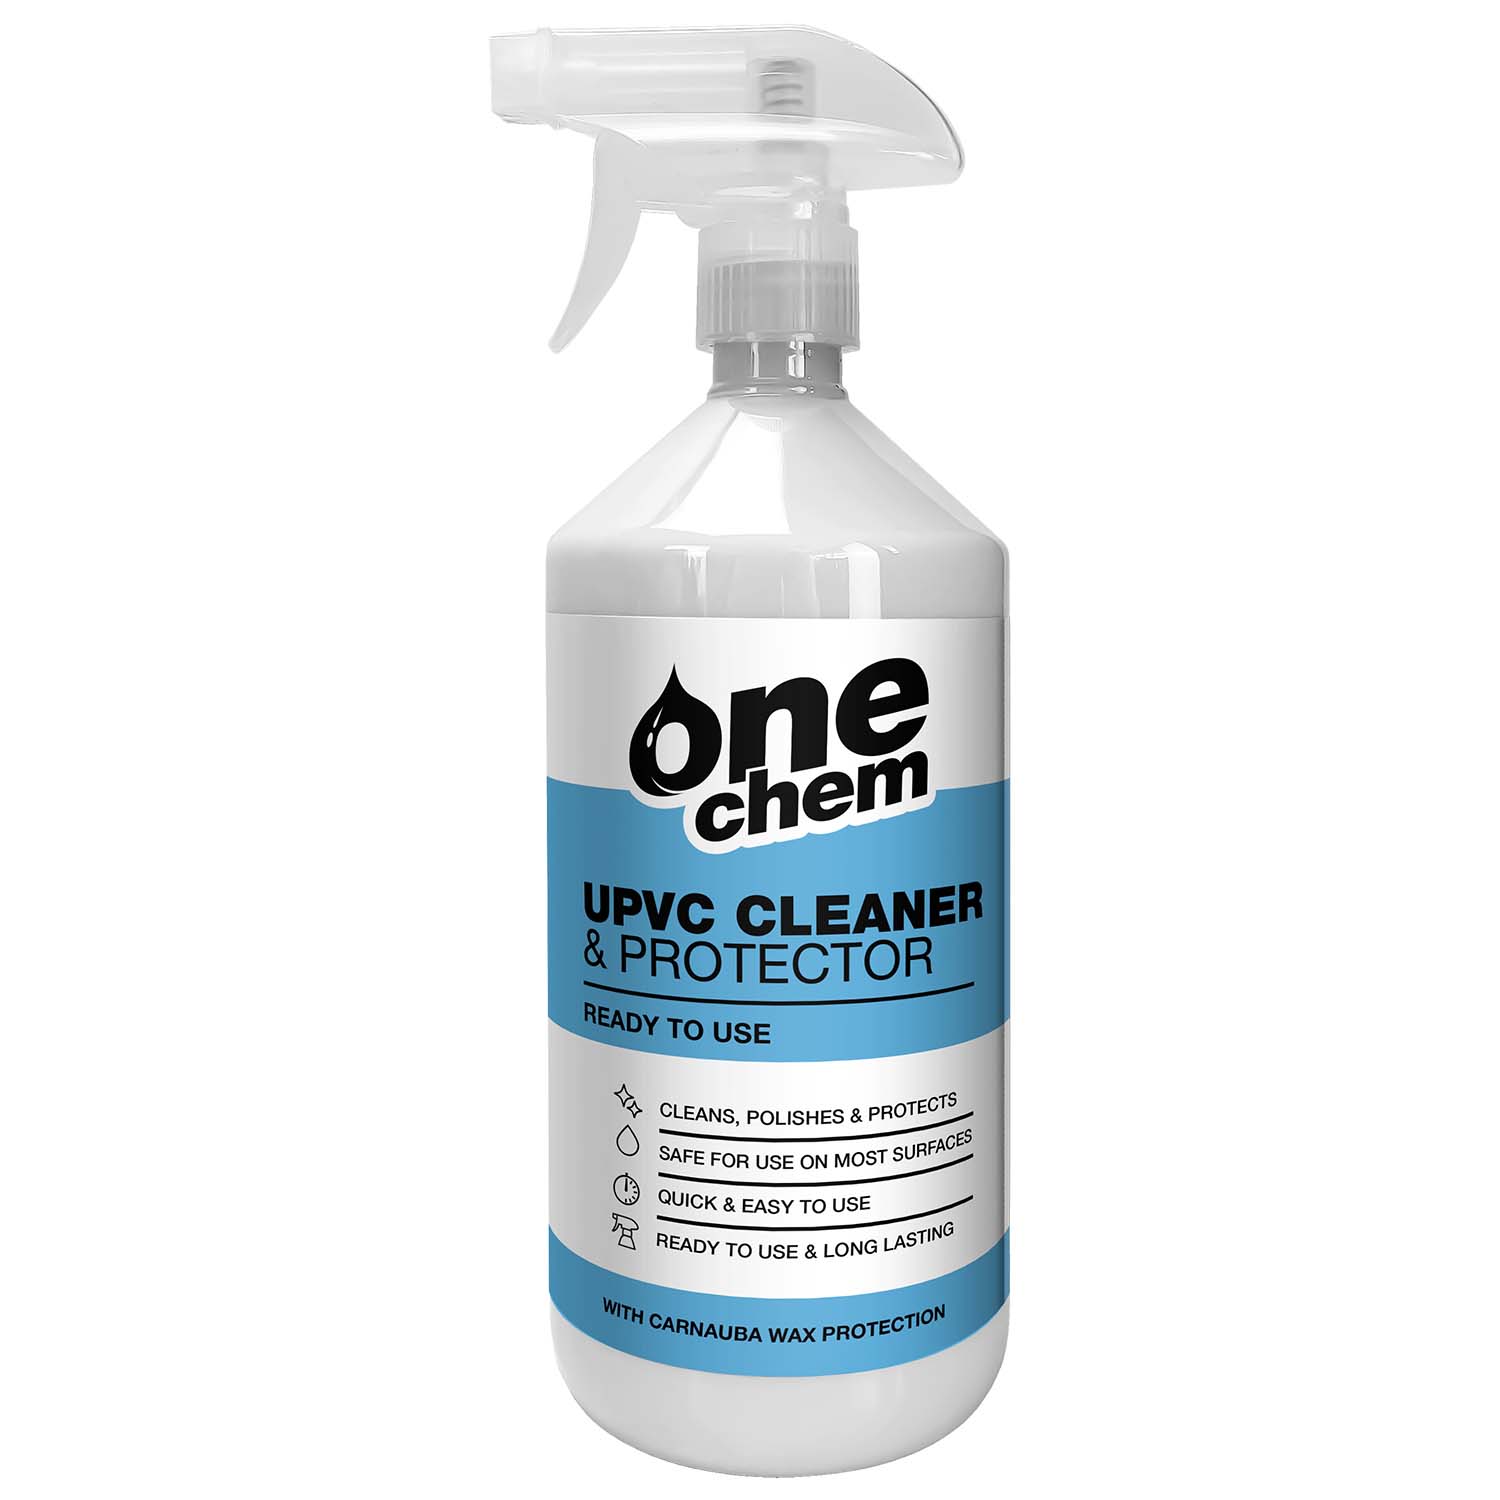 One Chem UPVC Cleaner & Protector 1L